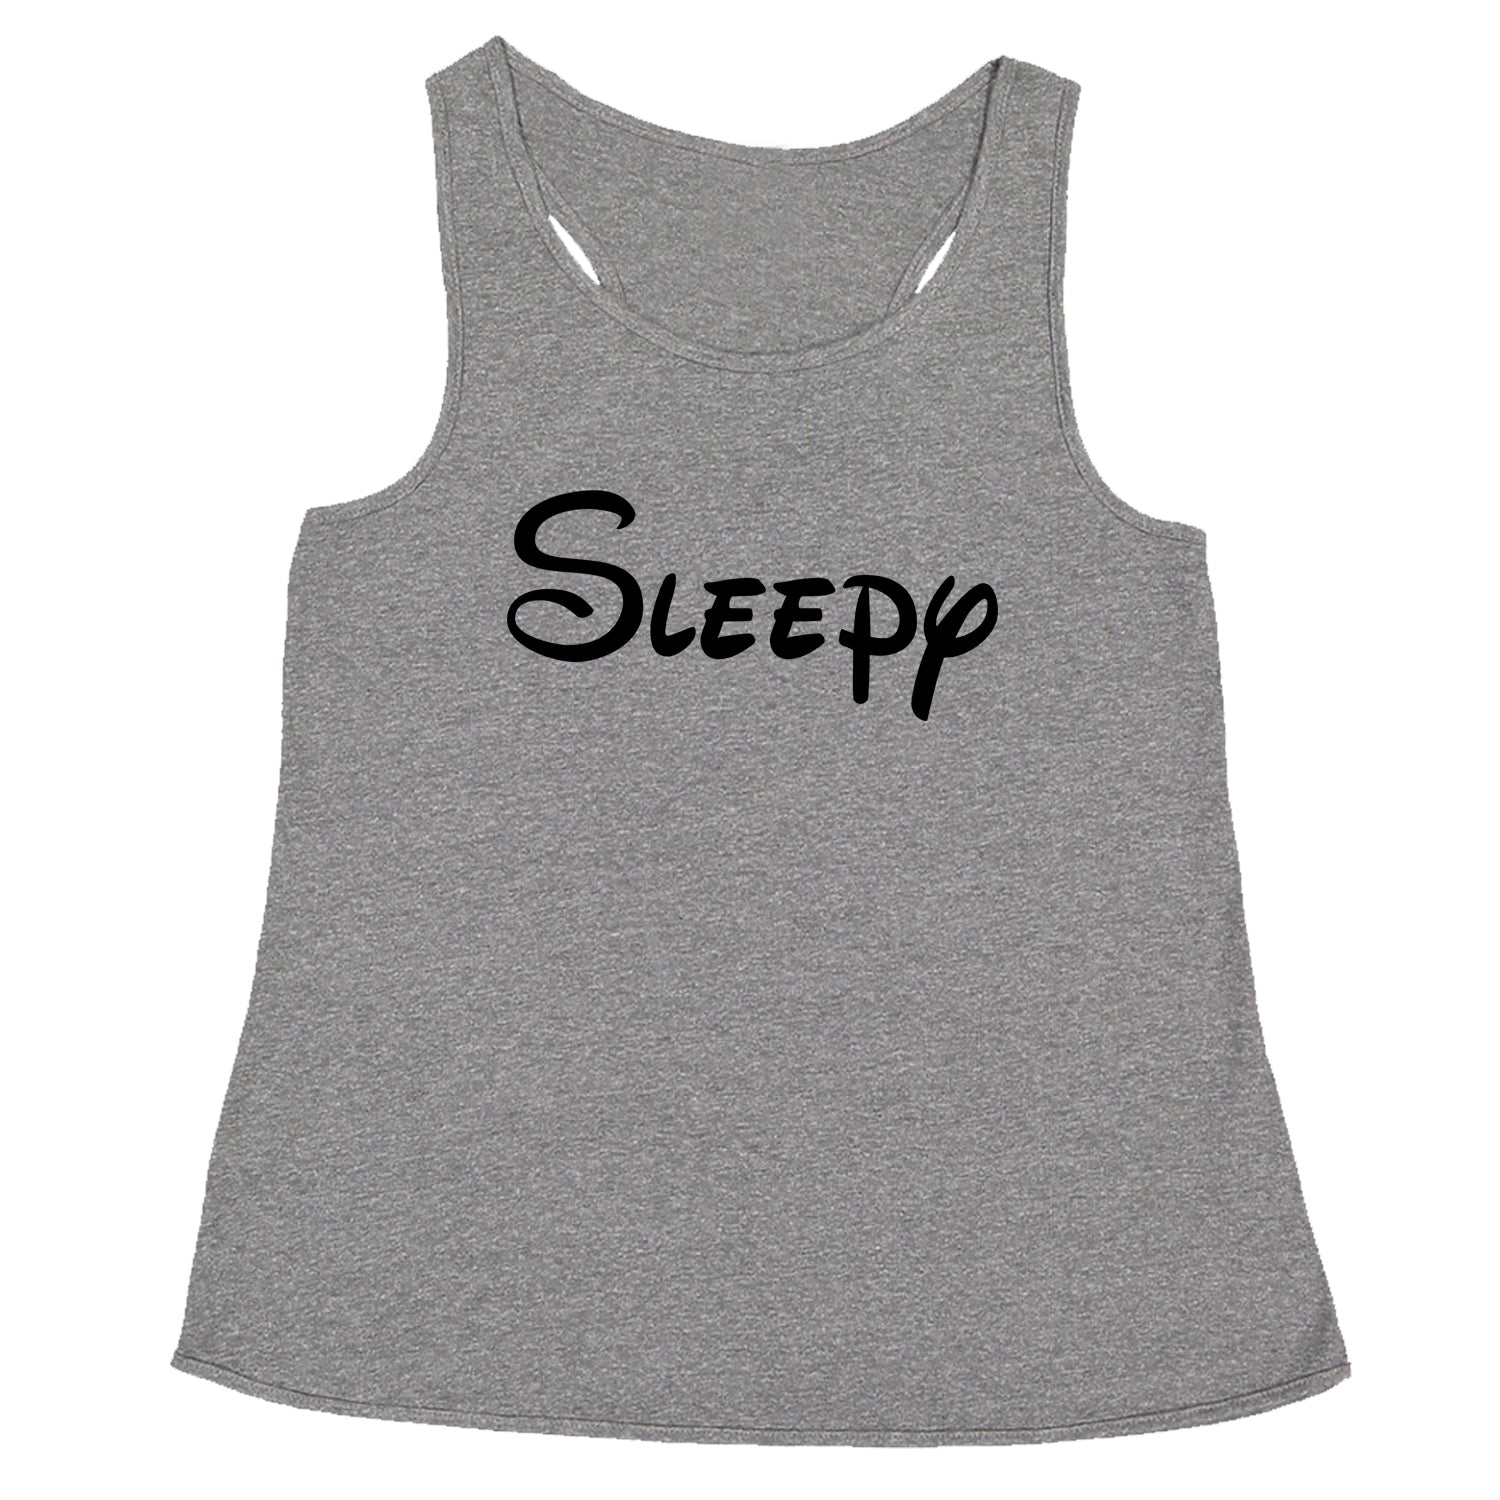 Sleepy - 7 Dwarfs Costume Racerback Tank Top for Women and, costume, dwarfs, group, halloween, matching, seven, snow, the, white by Expression Tees